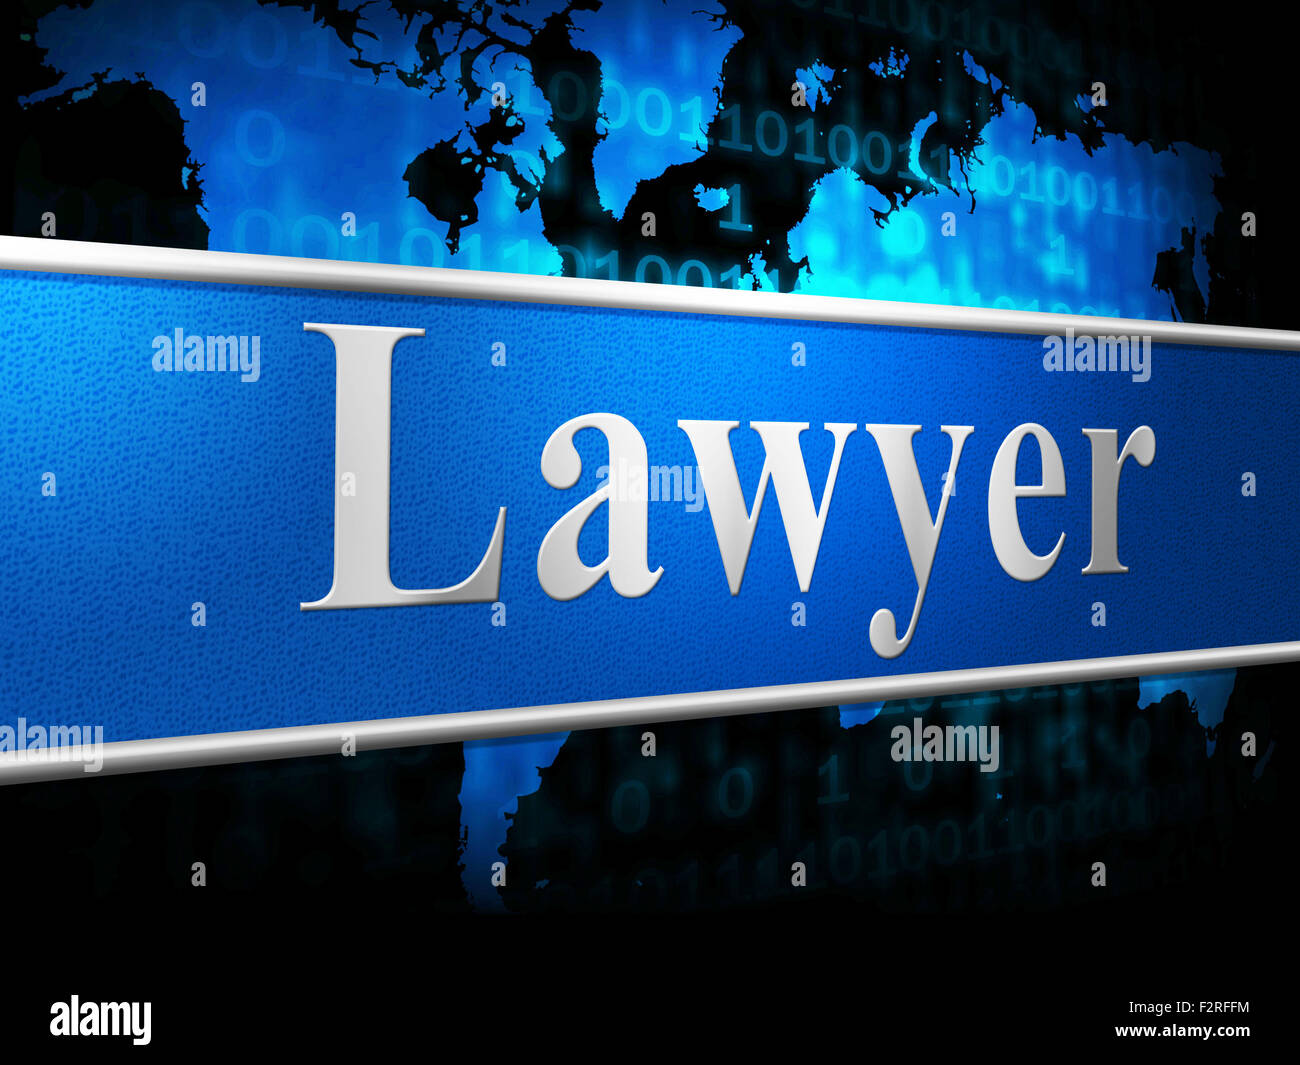 Lawyer Law Indicating Court Jurisprudence And Justice Stock Photo